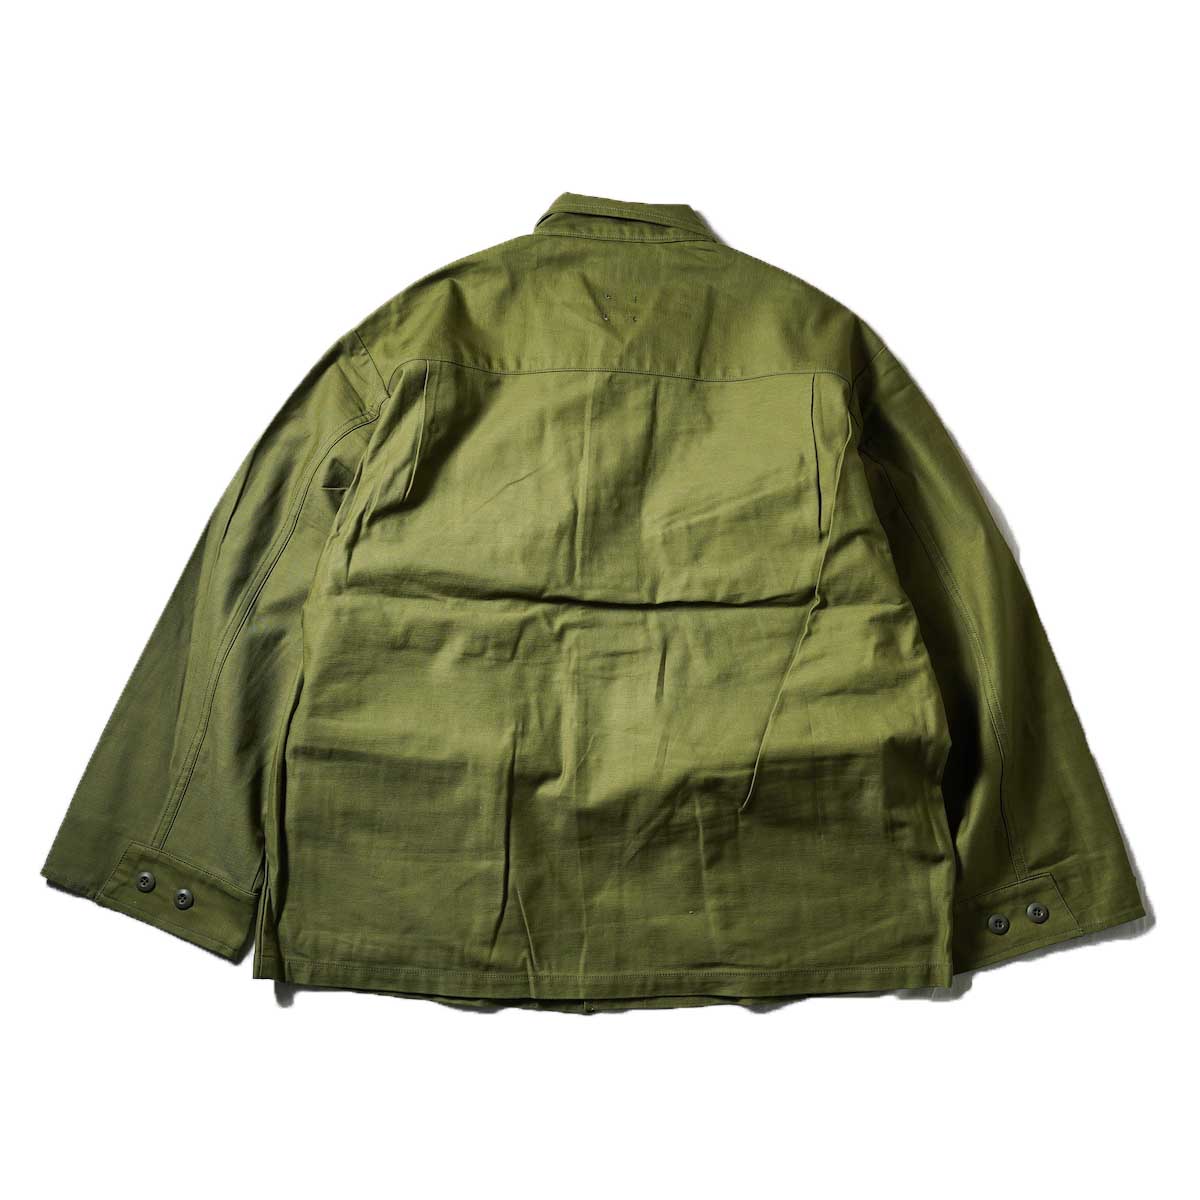 UNIVERSAL PRODUCTS / Gung Ho Fatigue Jacket (Olive)背面